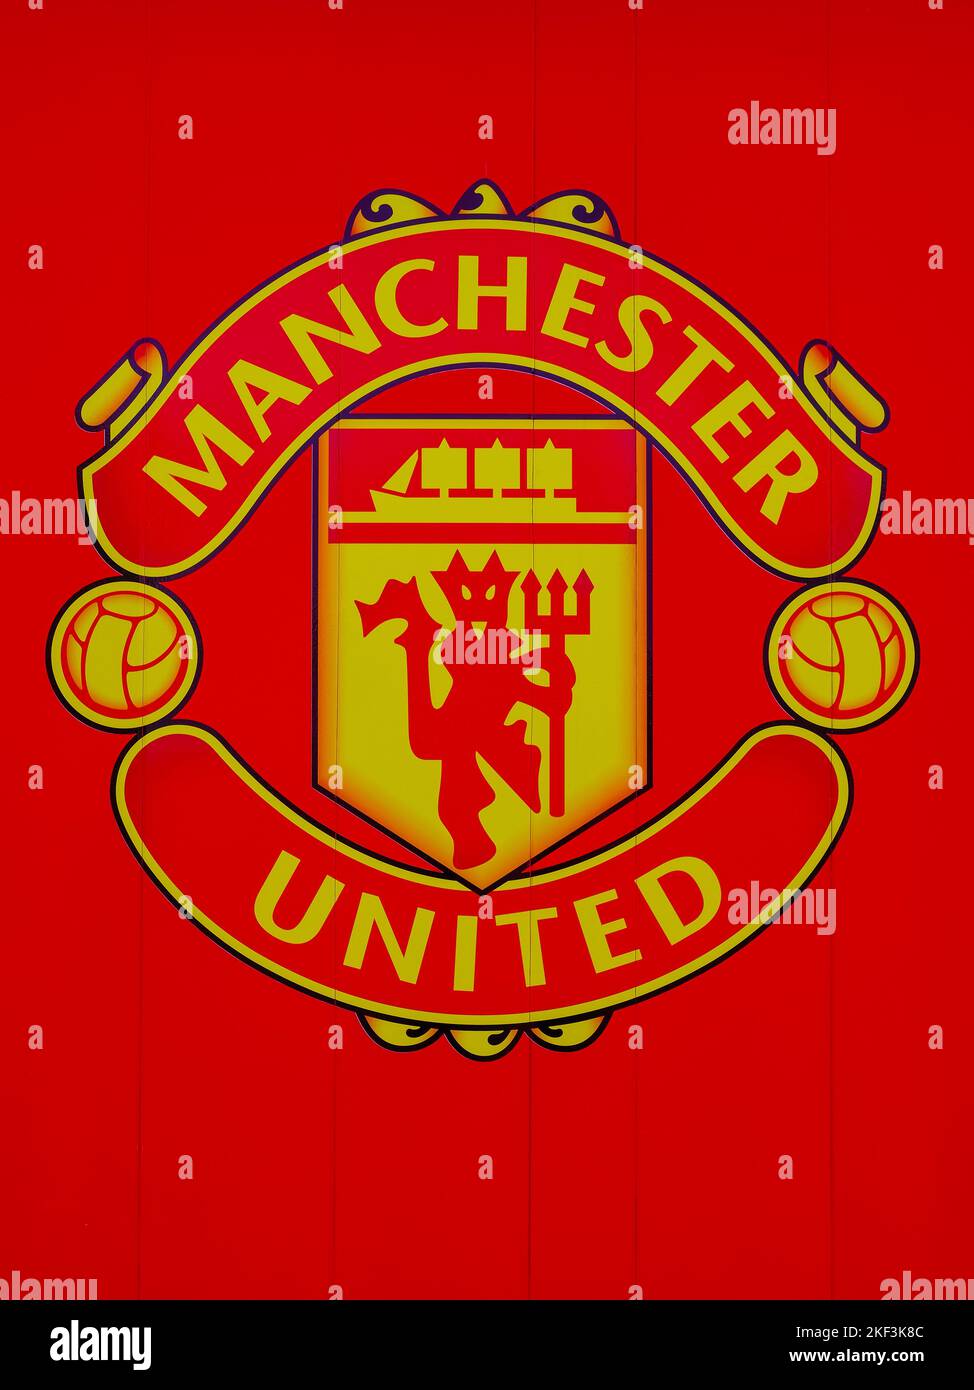 Manchester United Football Club Crest.  Manchester United logo.  Photograph of the side of a kiosk at Old Trafford Stock Photo